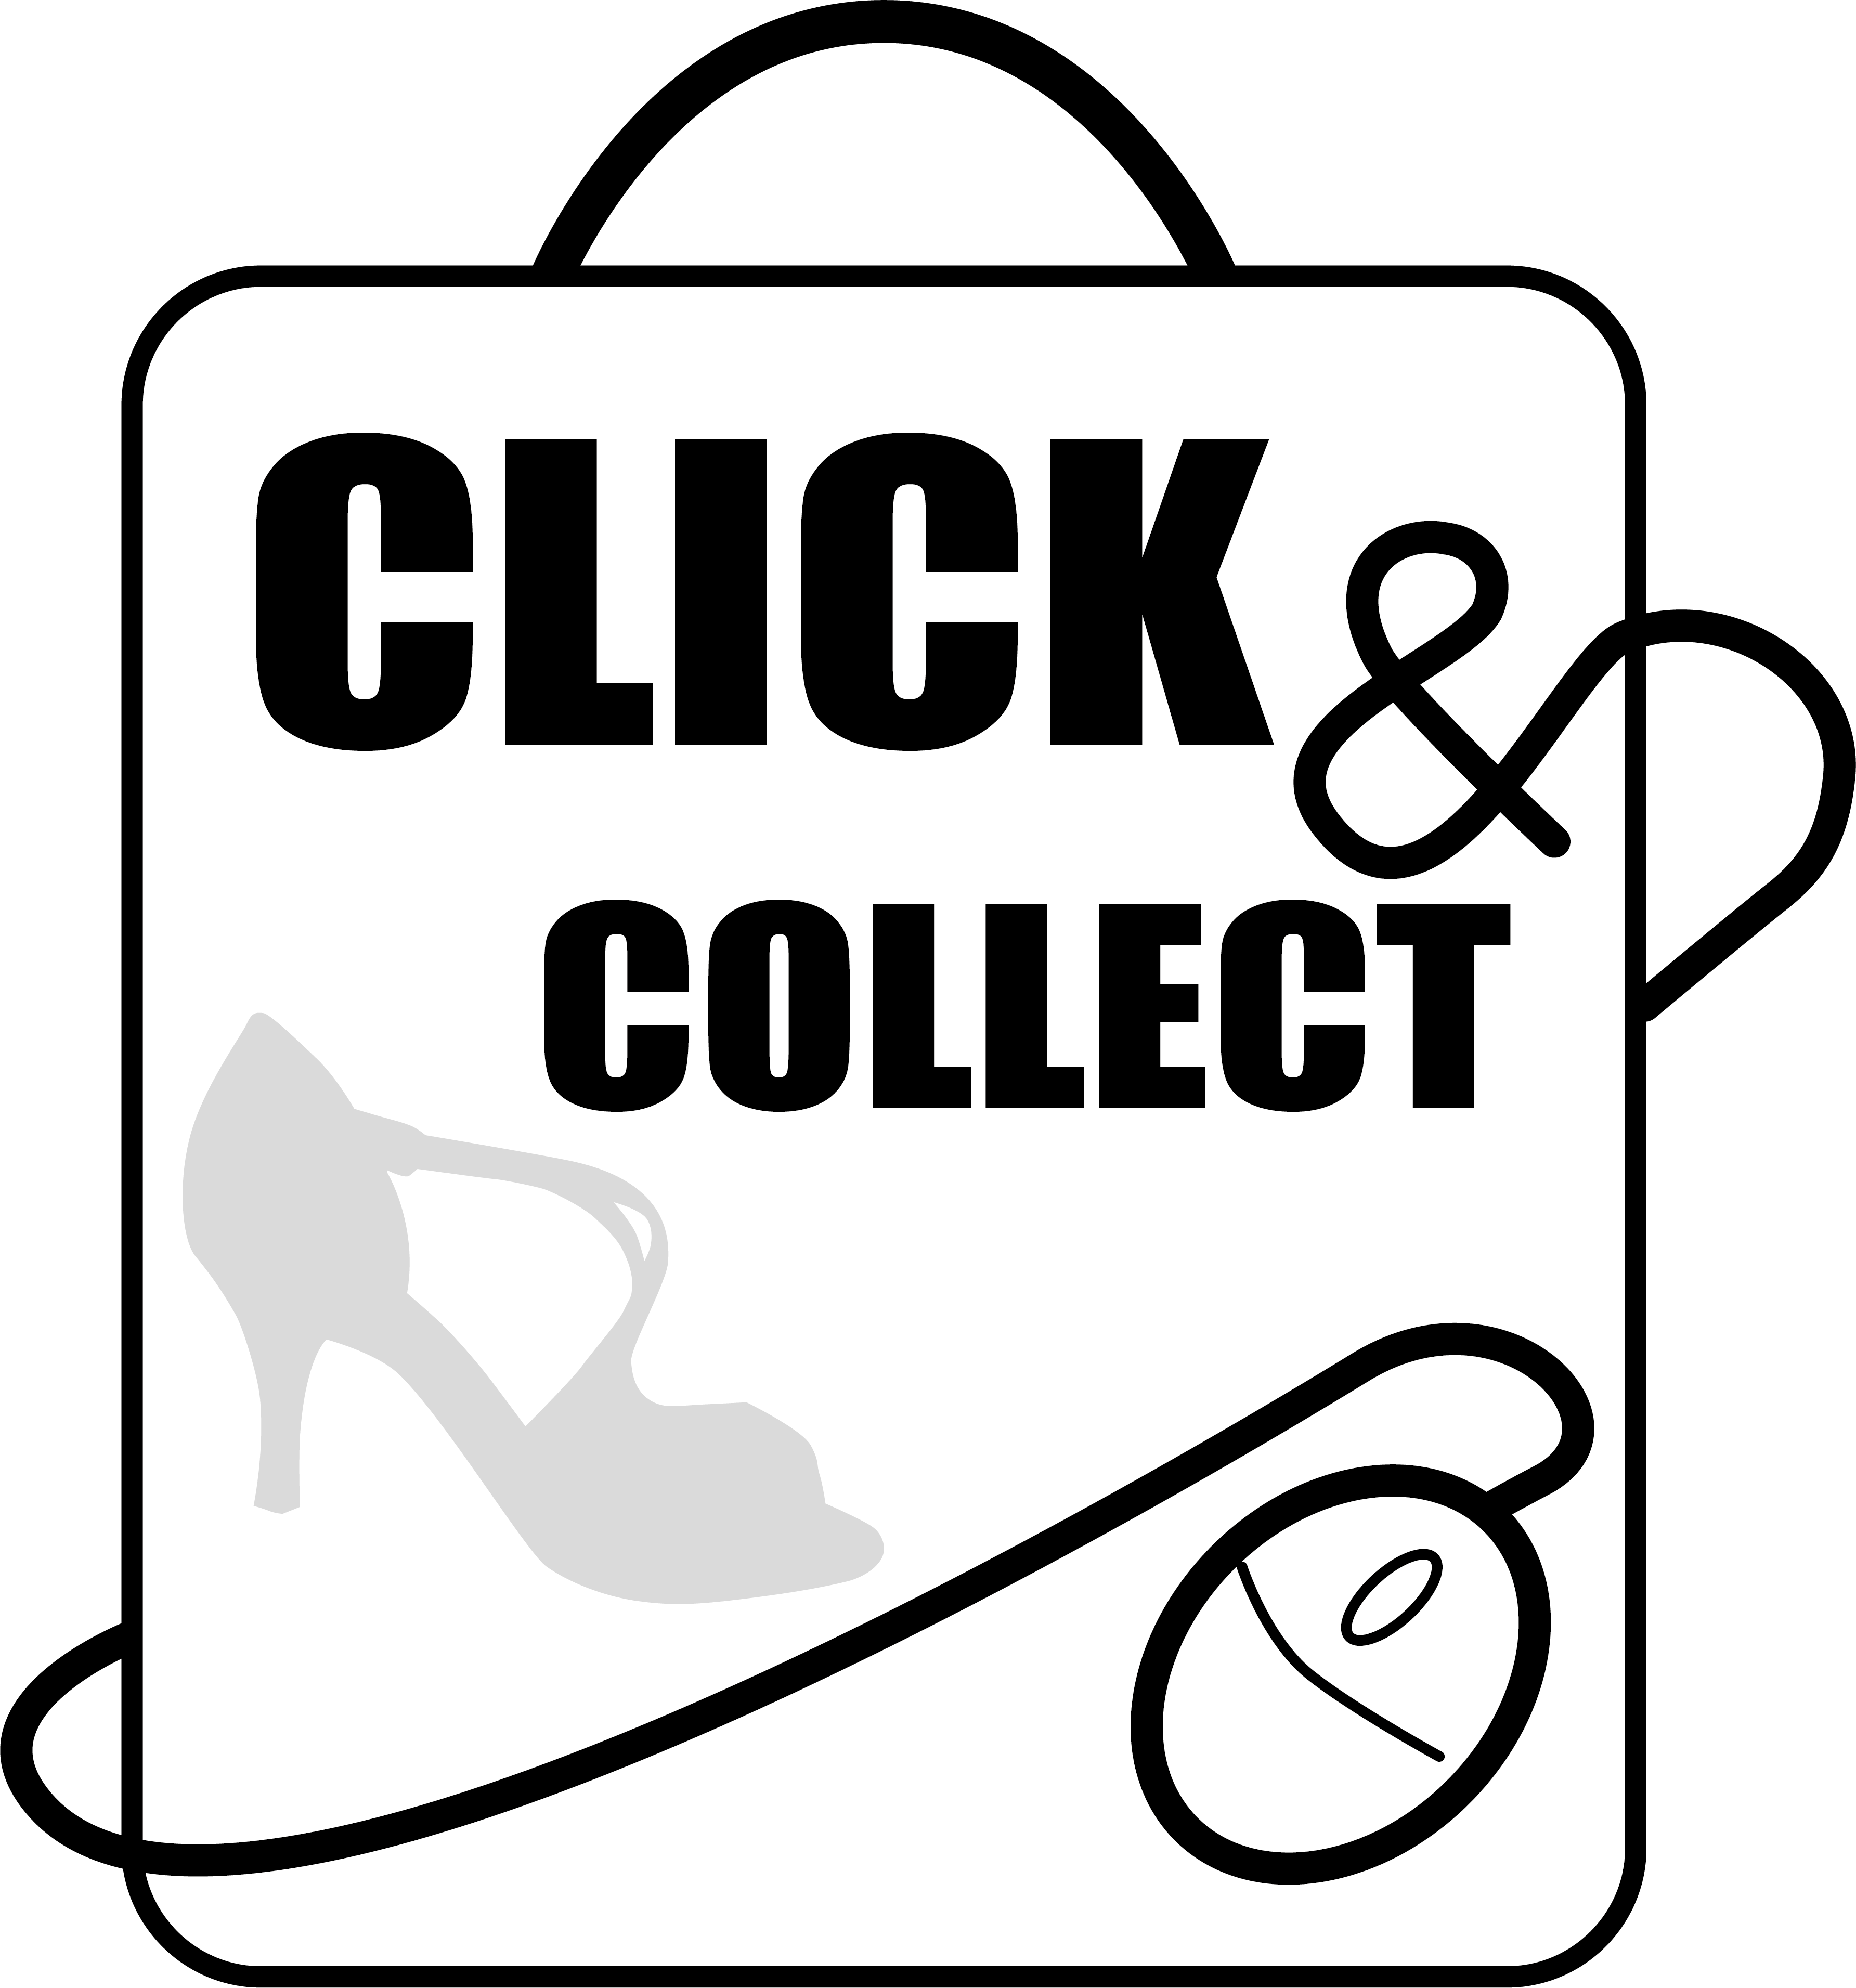 Selbstabholung (Click & Collect)